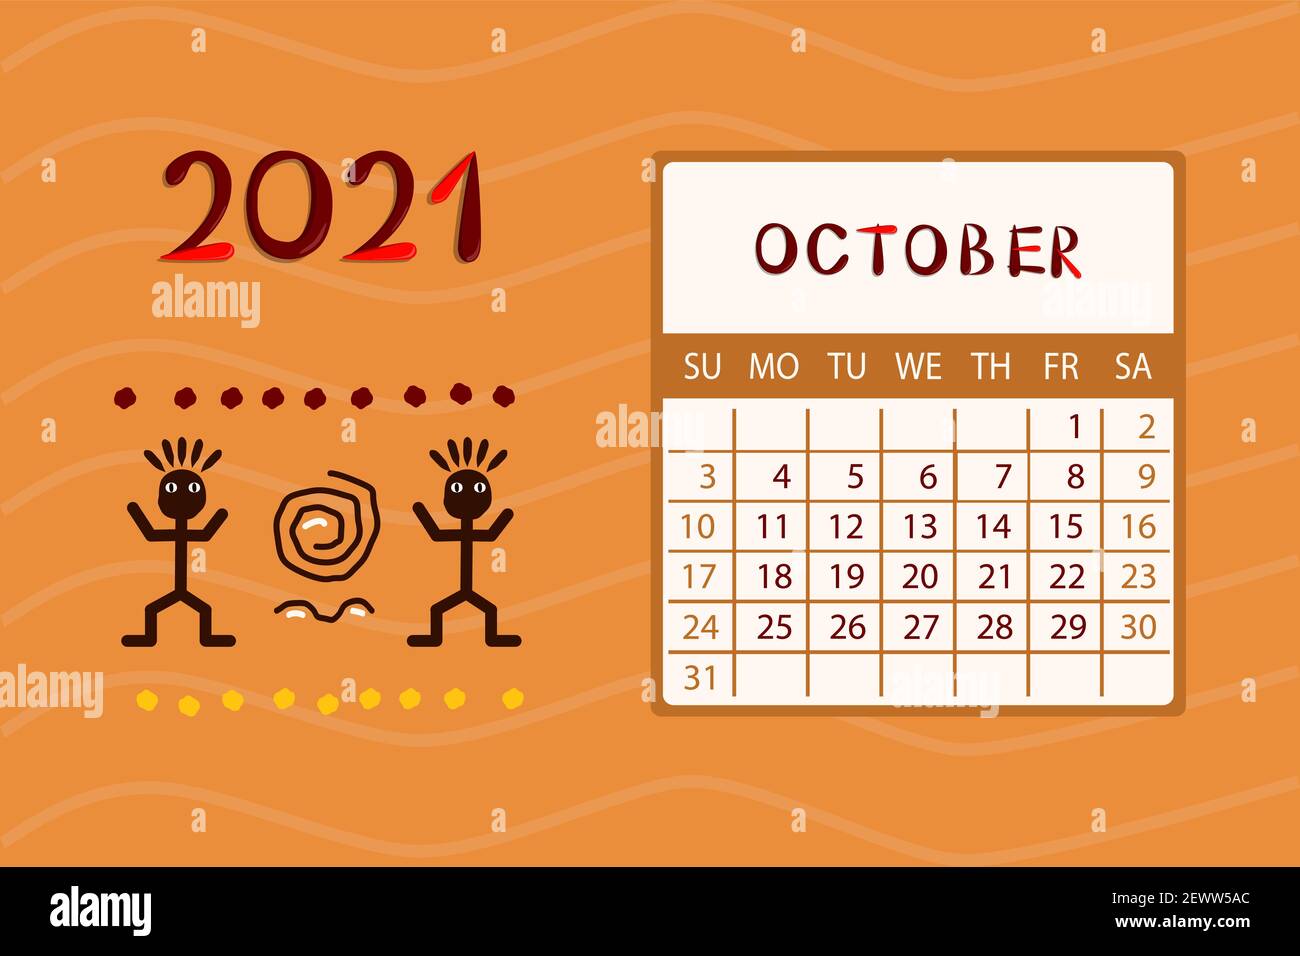 Calendar Africa for October 2021. Week starts on Sunday.Colorful design with ethnic pattern. Vector illustration. Stock Vector